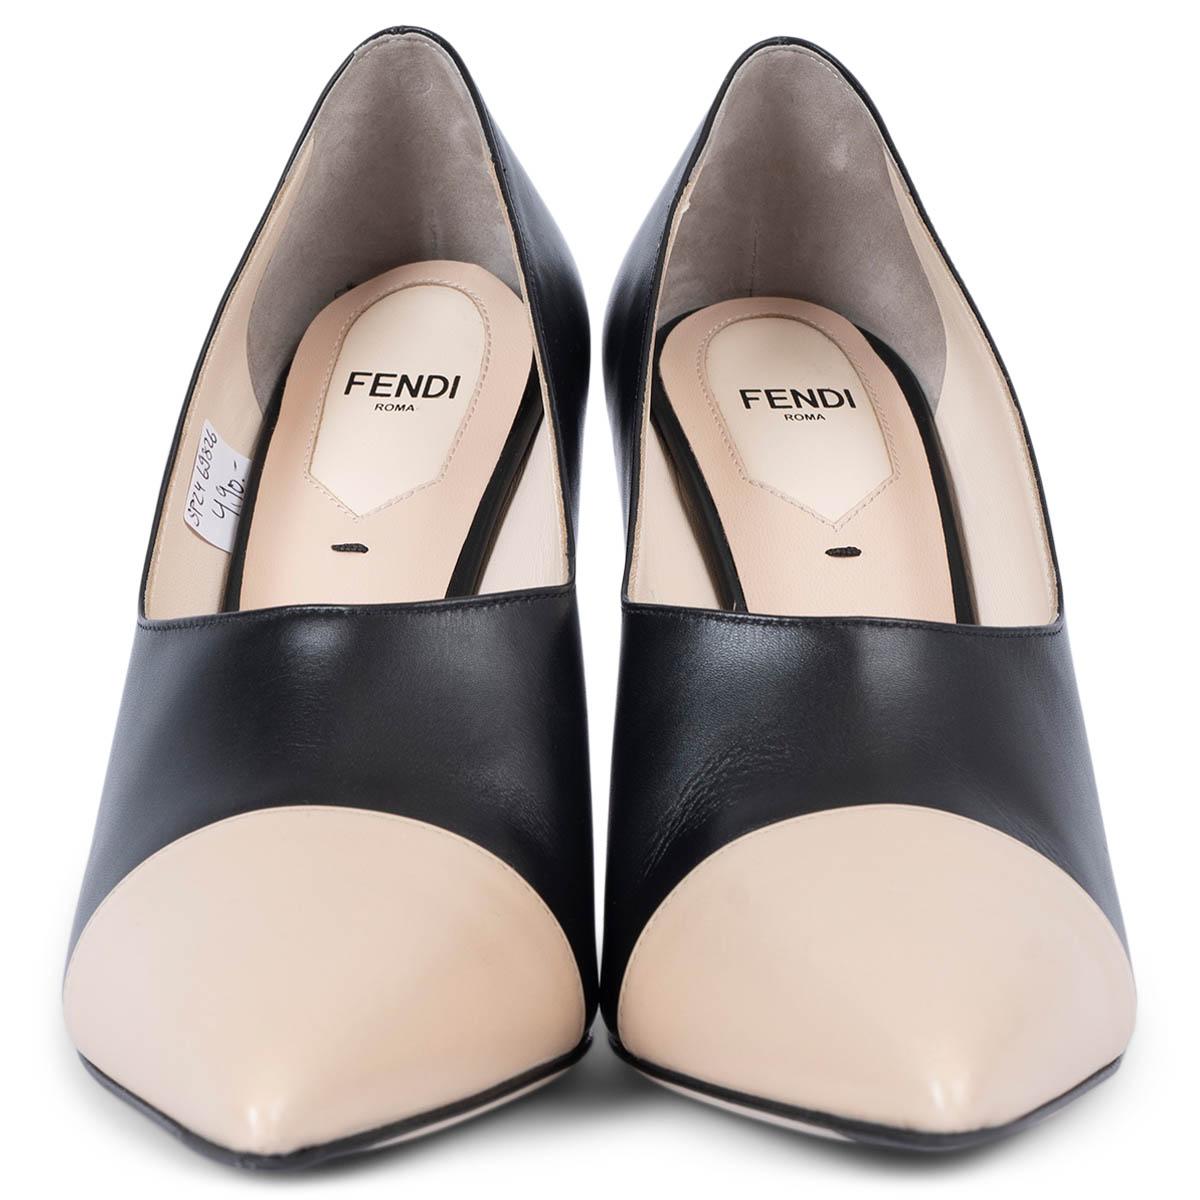 100% authentic Fendi pointed-toe pumps in black smooth leather with ivory cap toe. Have been worn once inside and are in virtually new condition. 

Measurements
Imprinted Size	38.5
Shoe Size	38.5
Inside Sole	25cm (9.8in)
Width	7.5cm